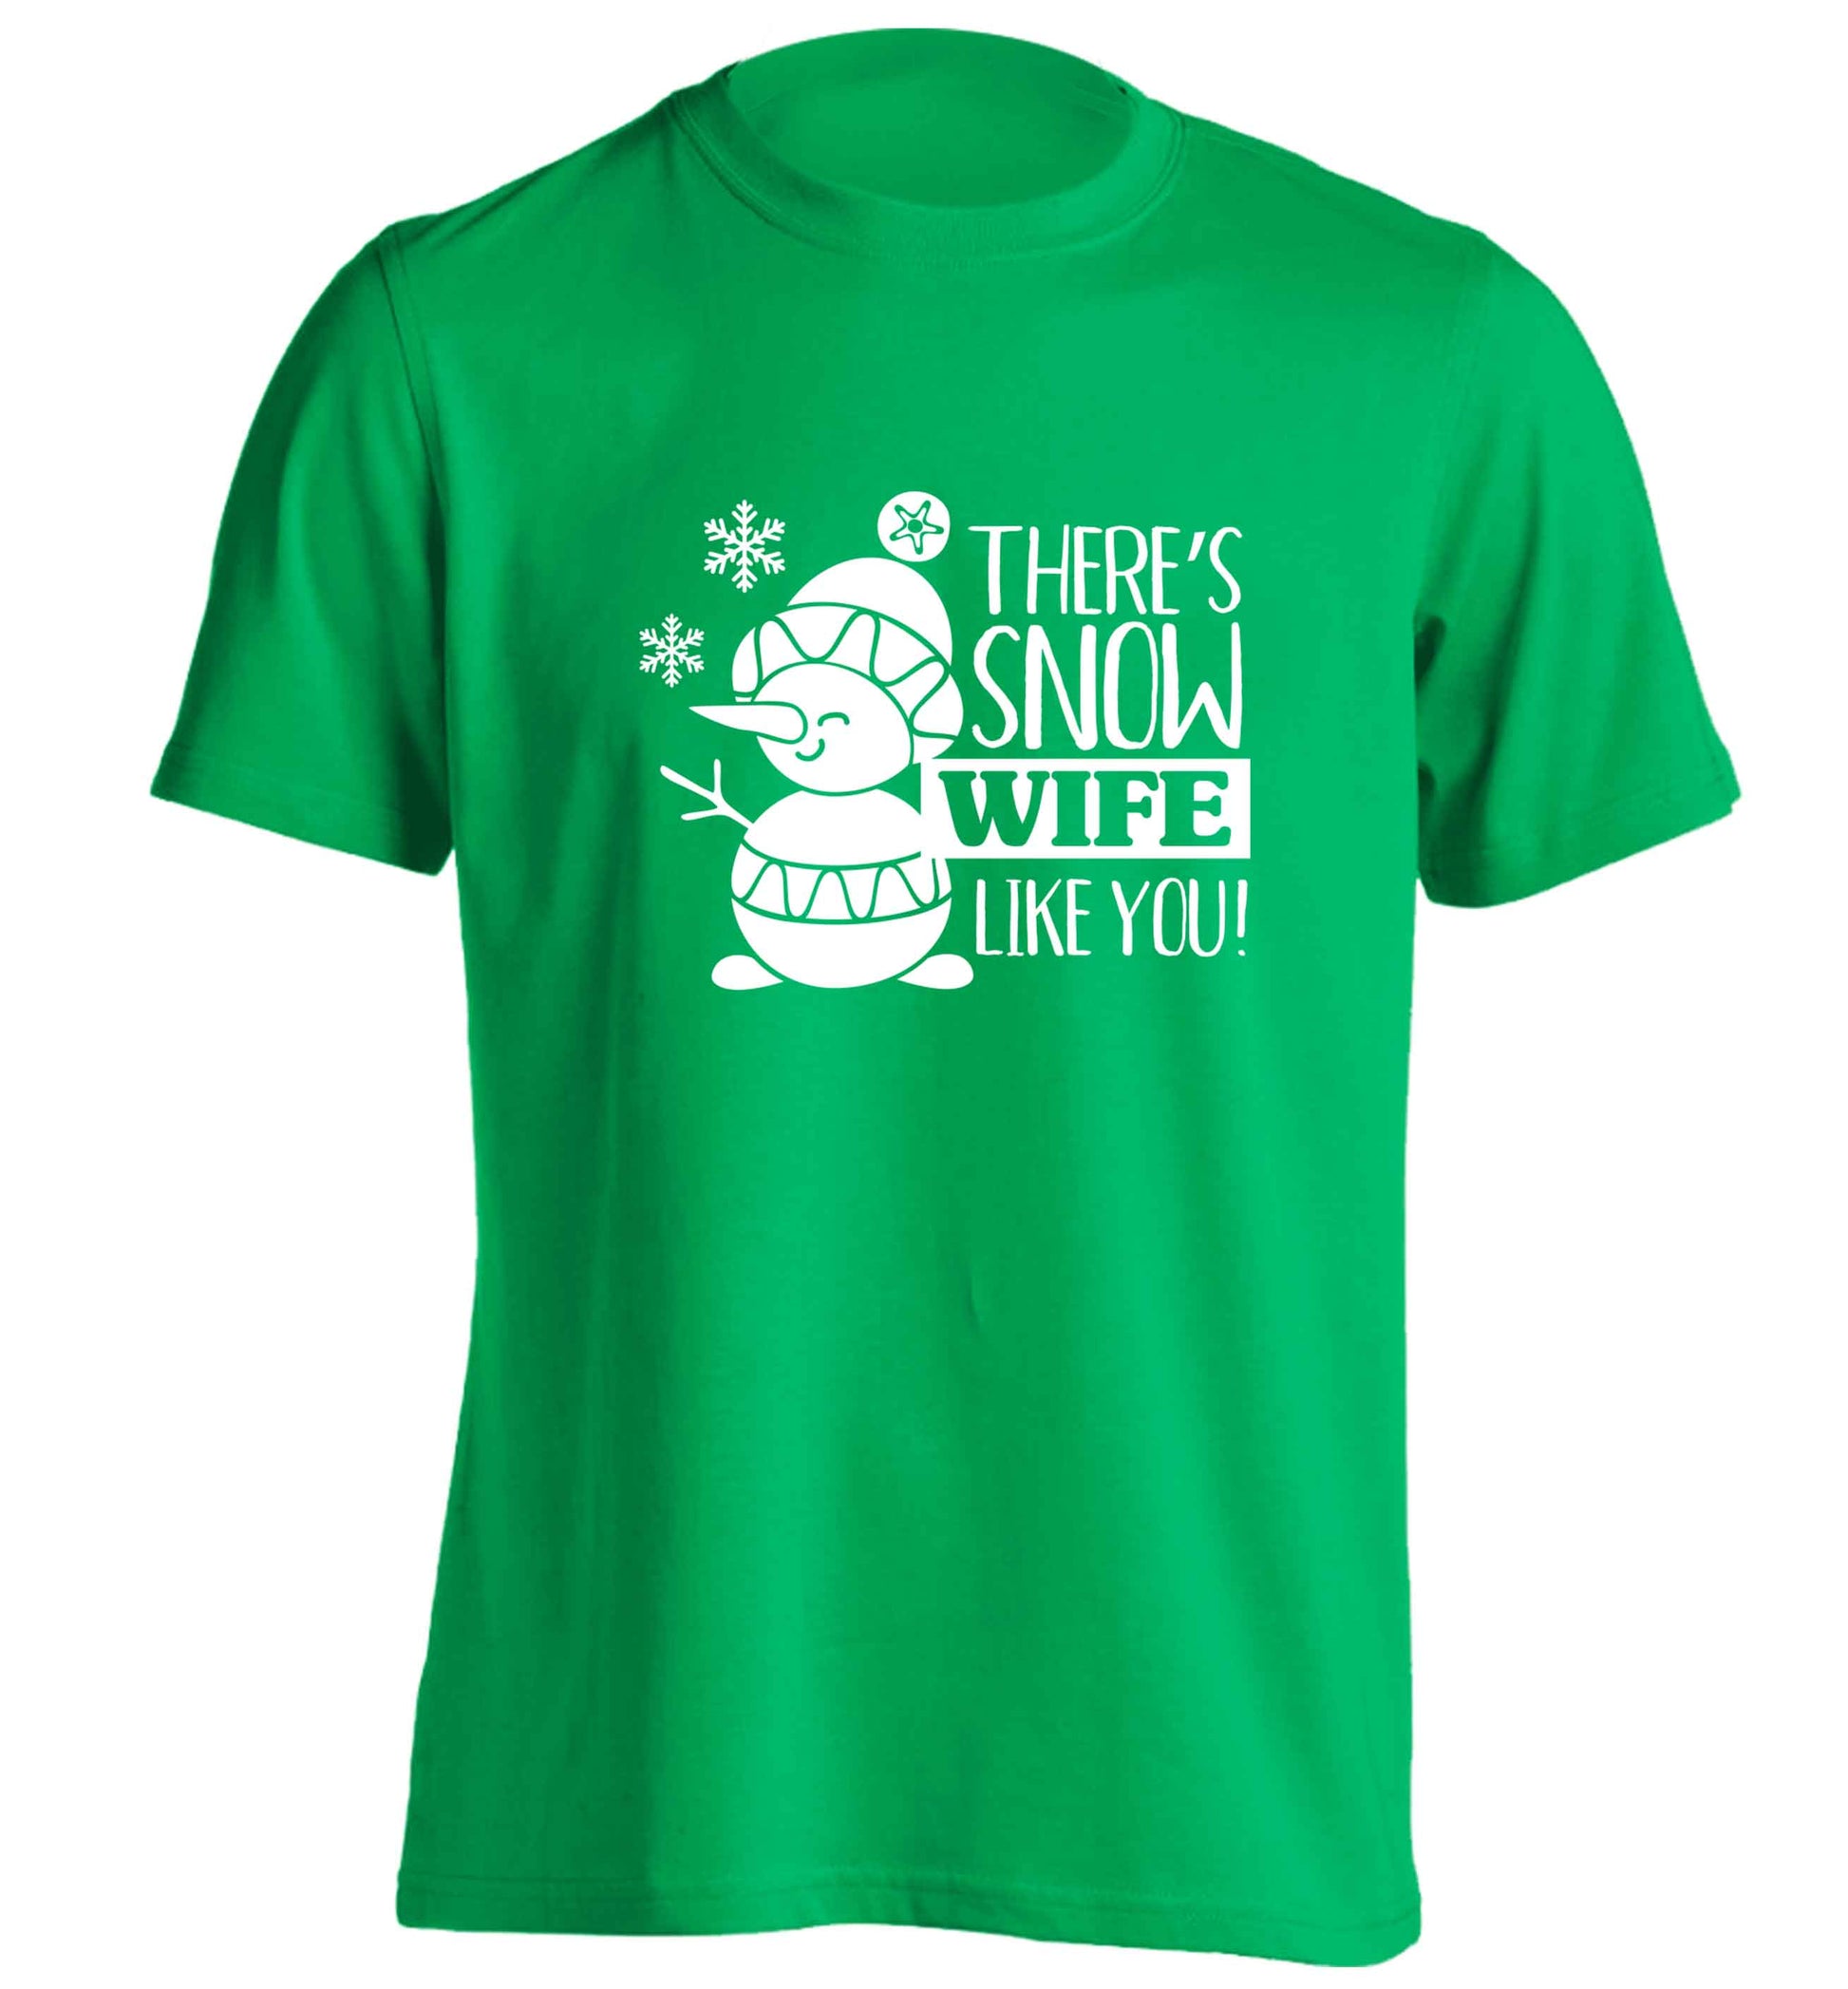 There's snow wife like you adults unisex green Tshirt 2XL